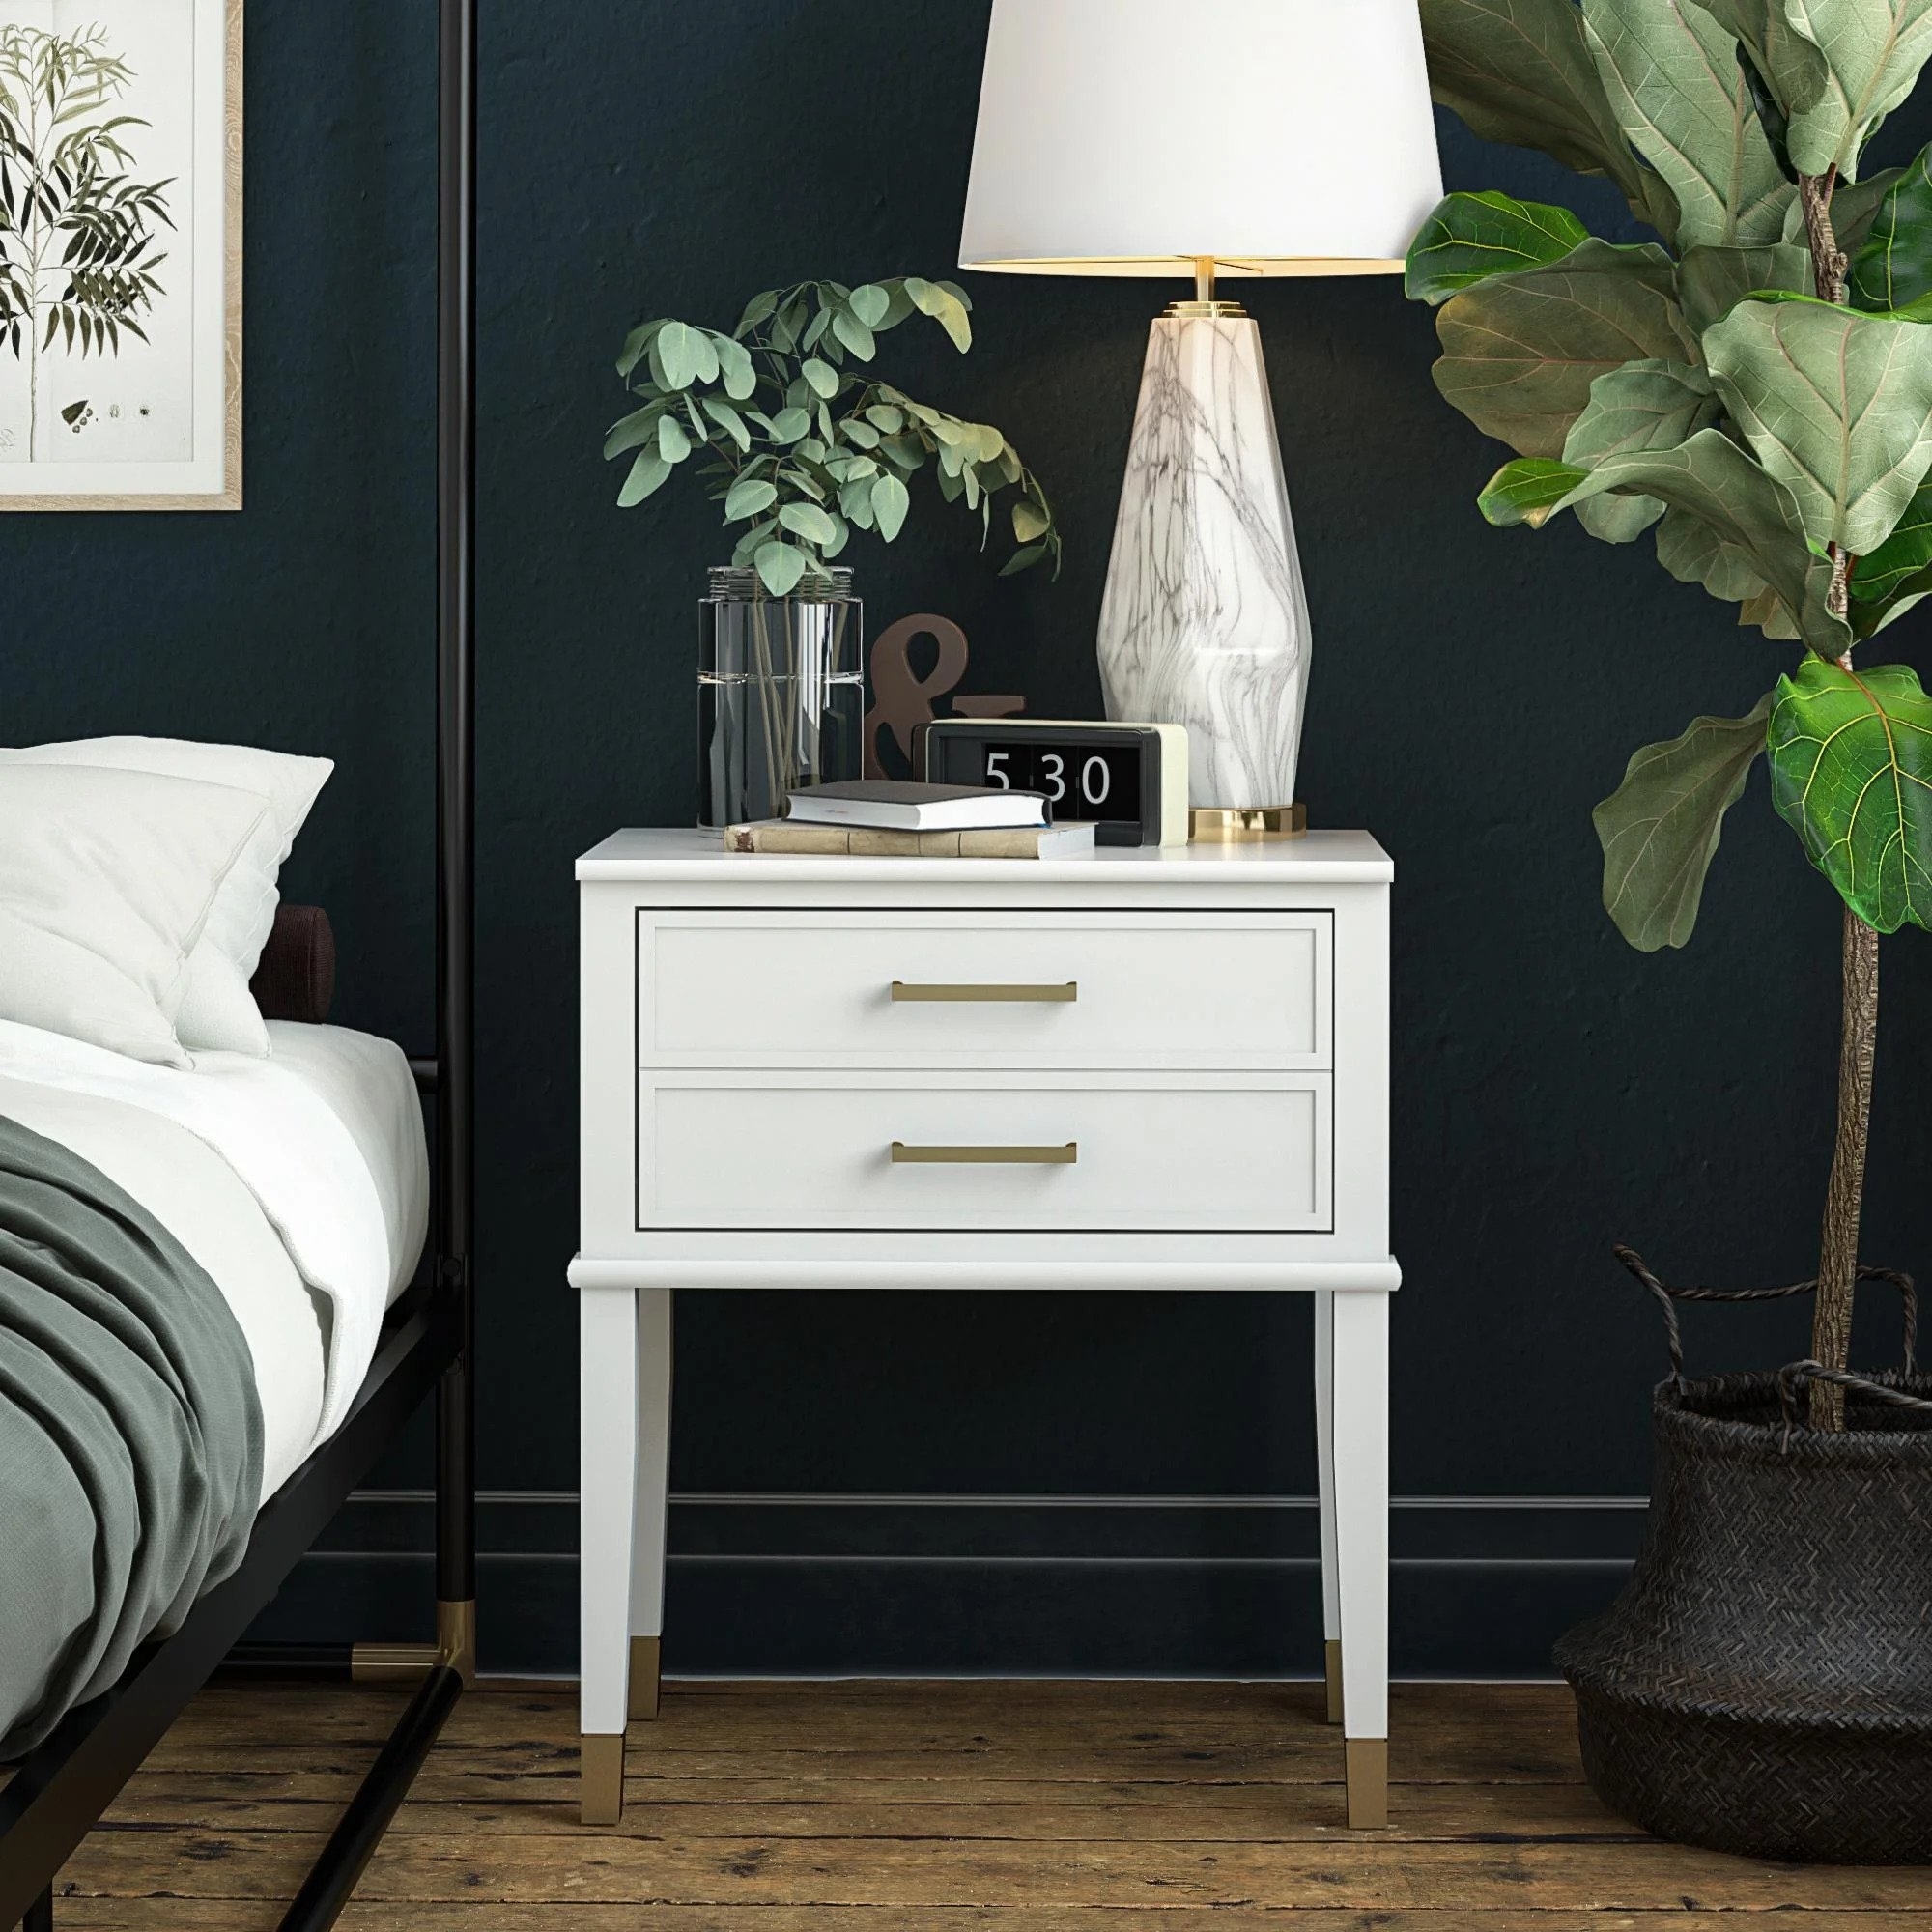 The nightstand in white with brass finishes